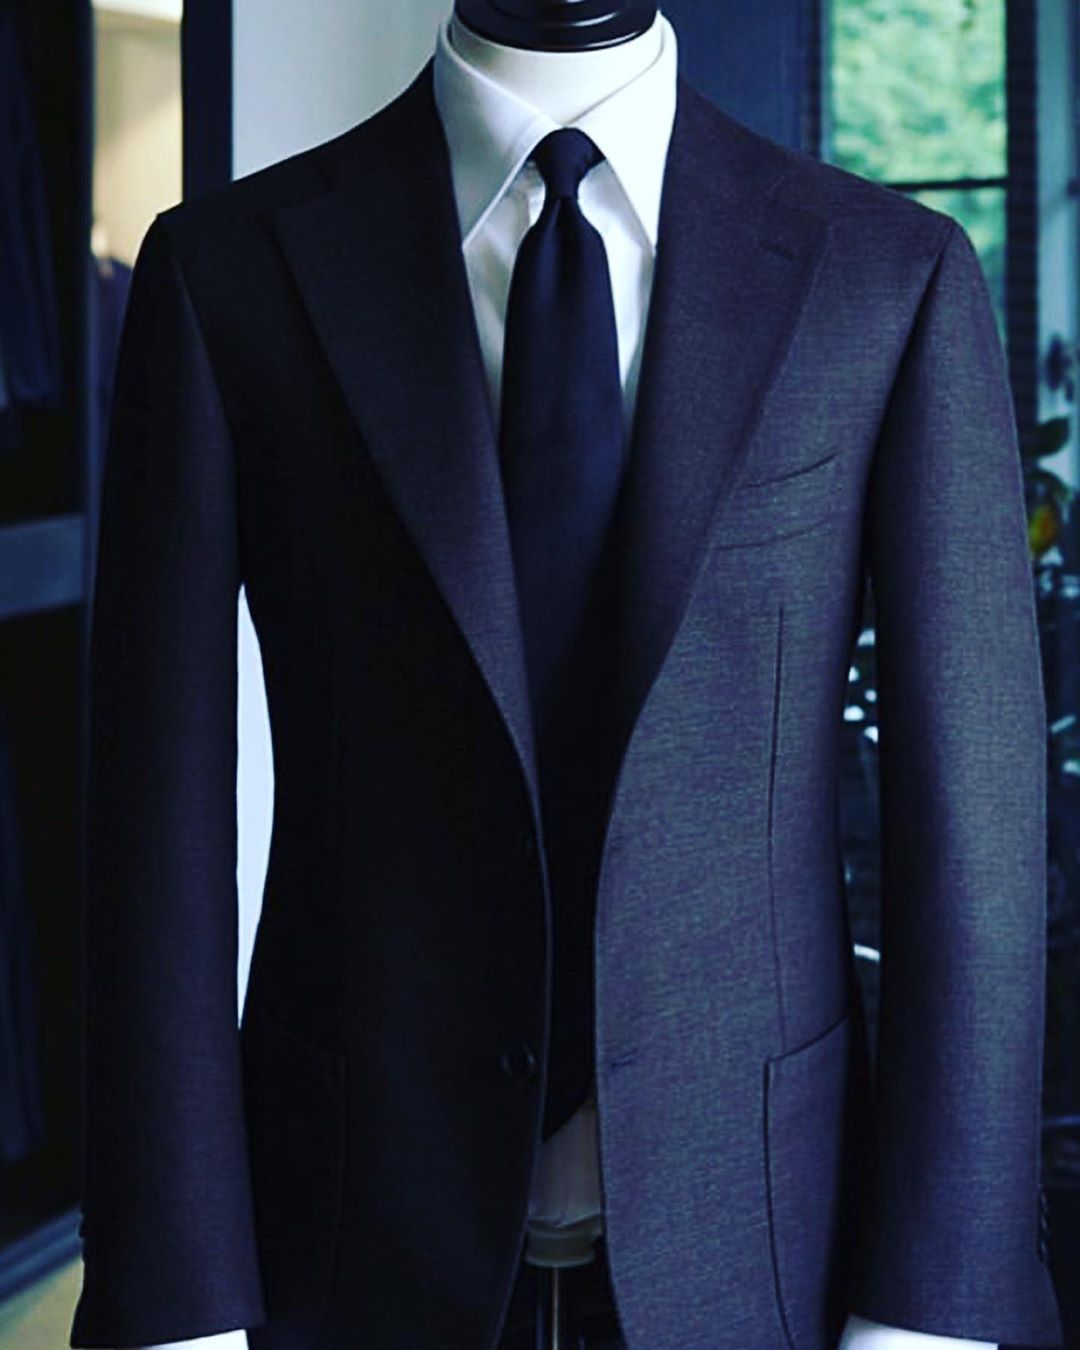 Bespoke suits: The grand way of dressing